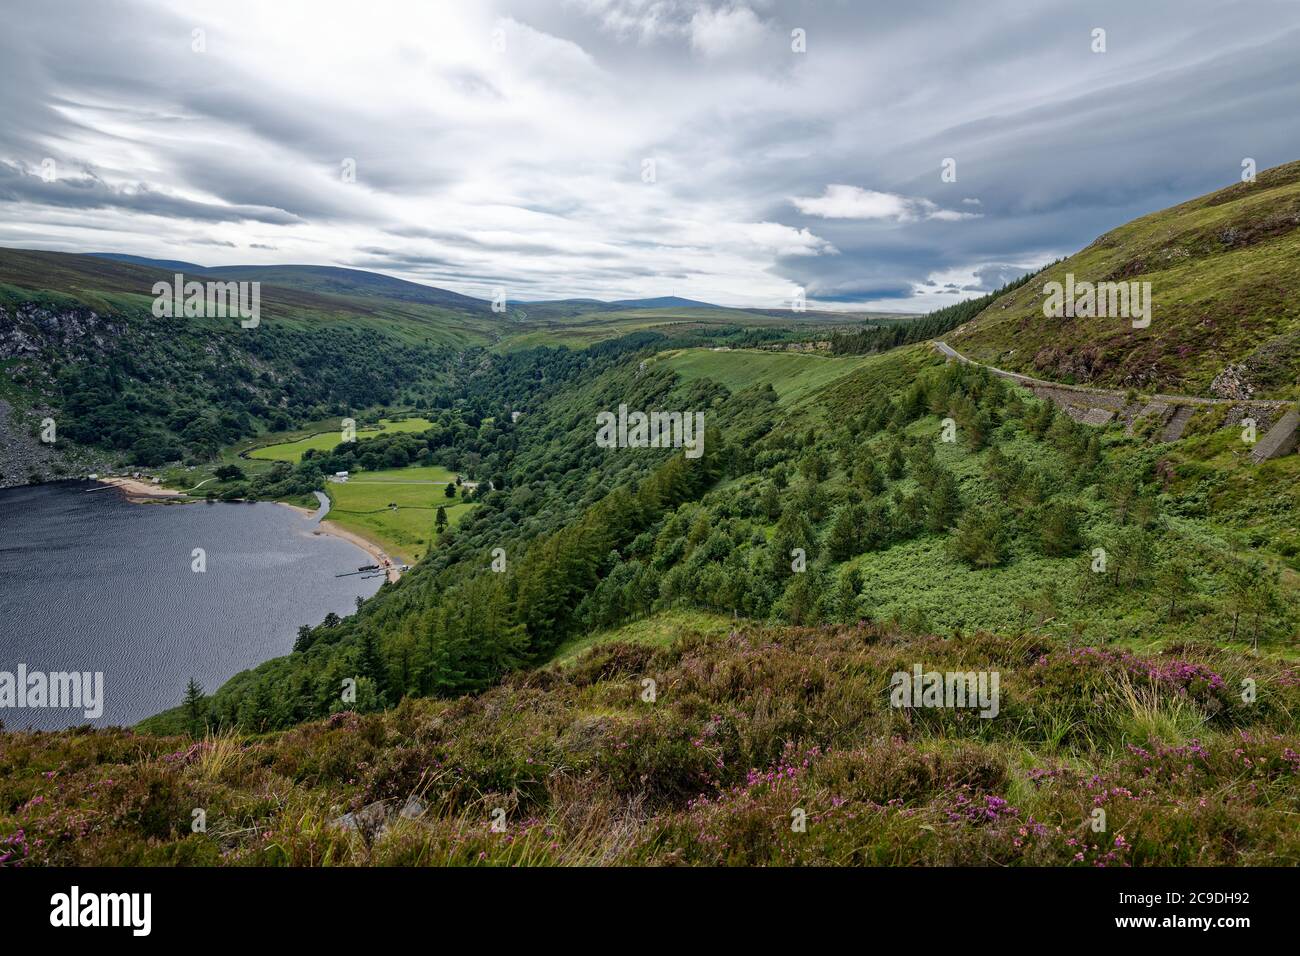 Lough Tay in Wicklow mounts.The place of filming early episodes Vikings series.The film attribute vikings drakkar boat still  moored at the lake shore Stock Photo